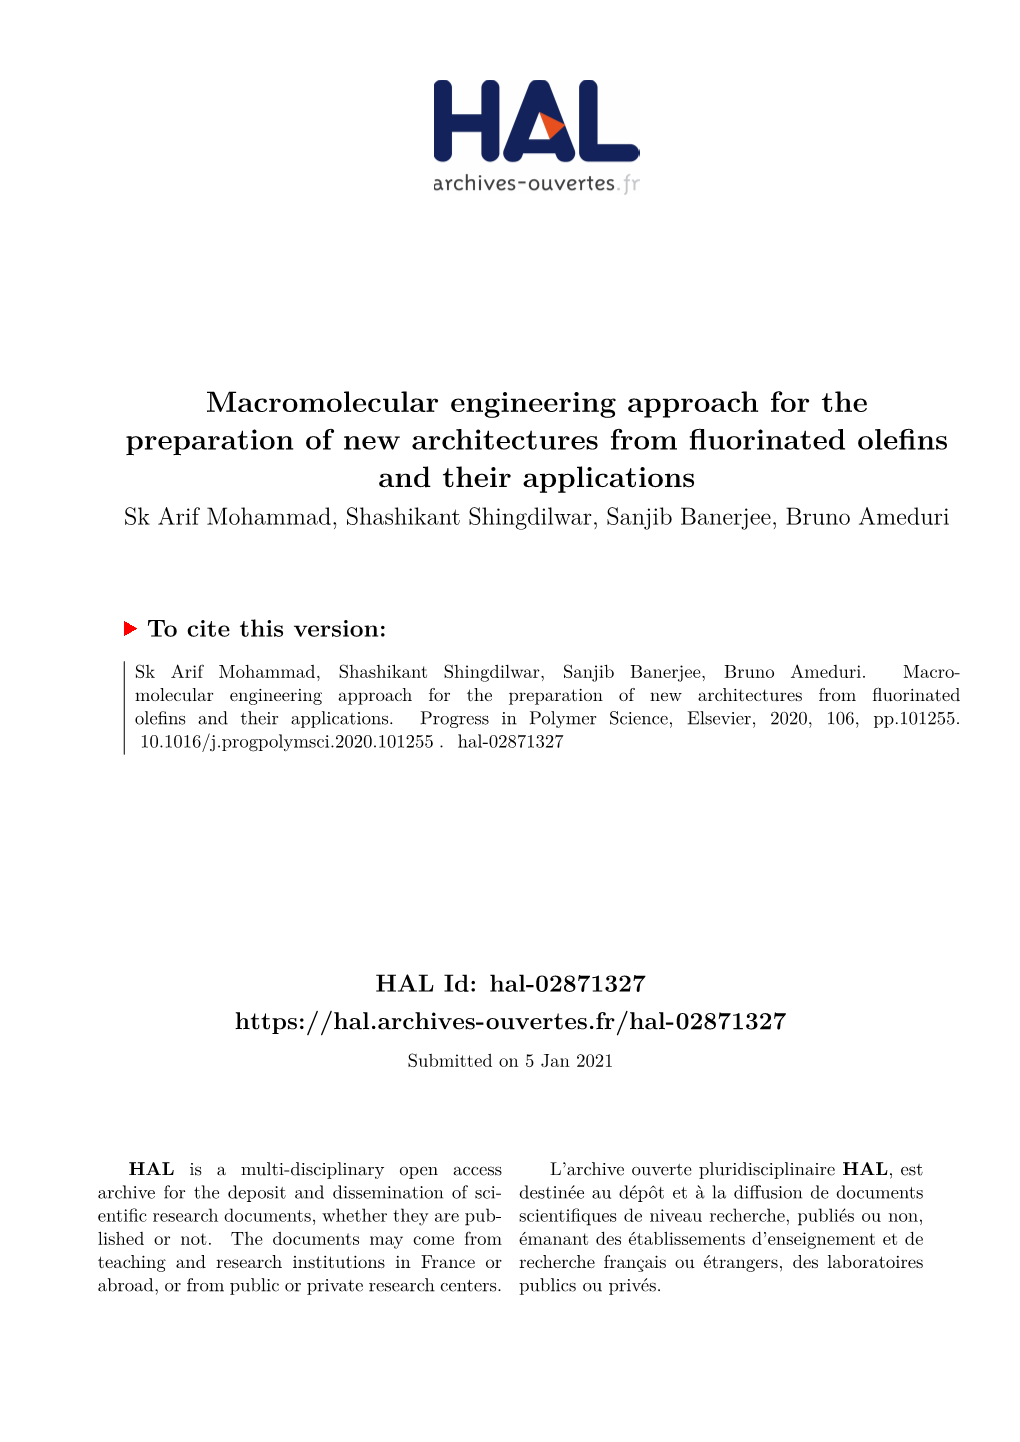 Macromolecular Engineering Approach for the Preparation of New